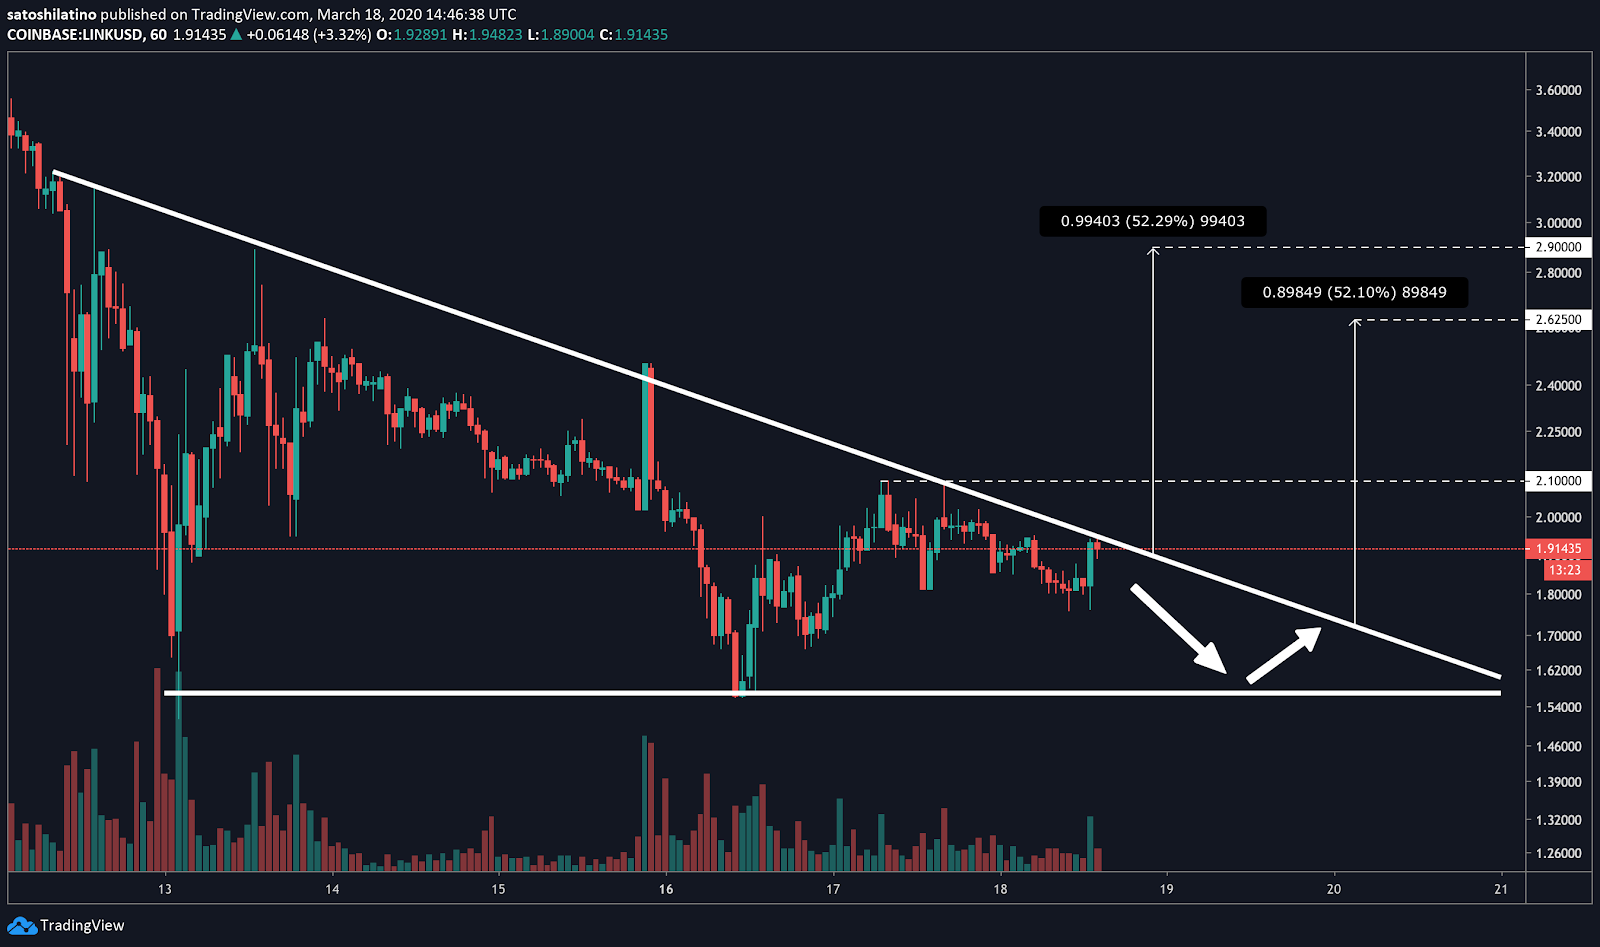 Chainlink / USD price chart on TradingView